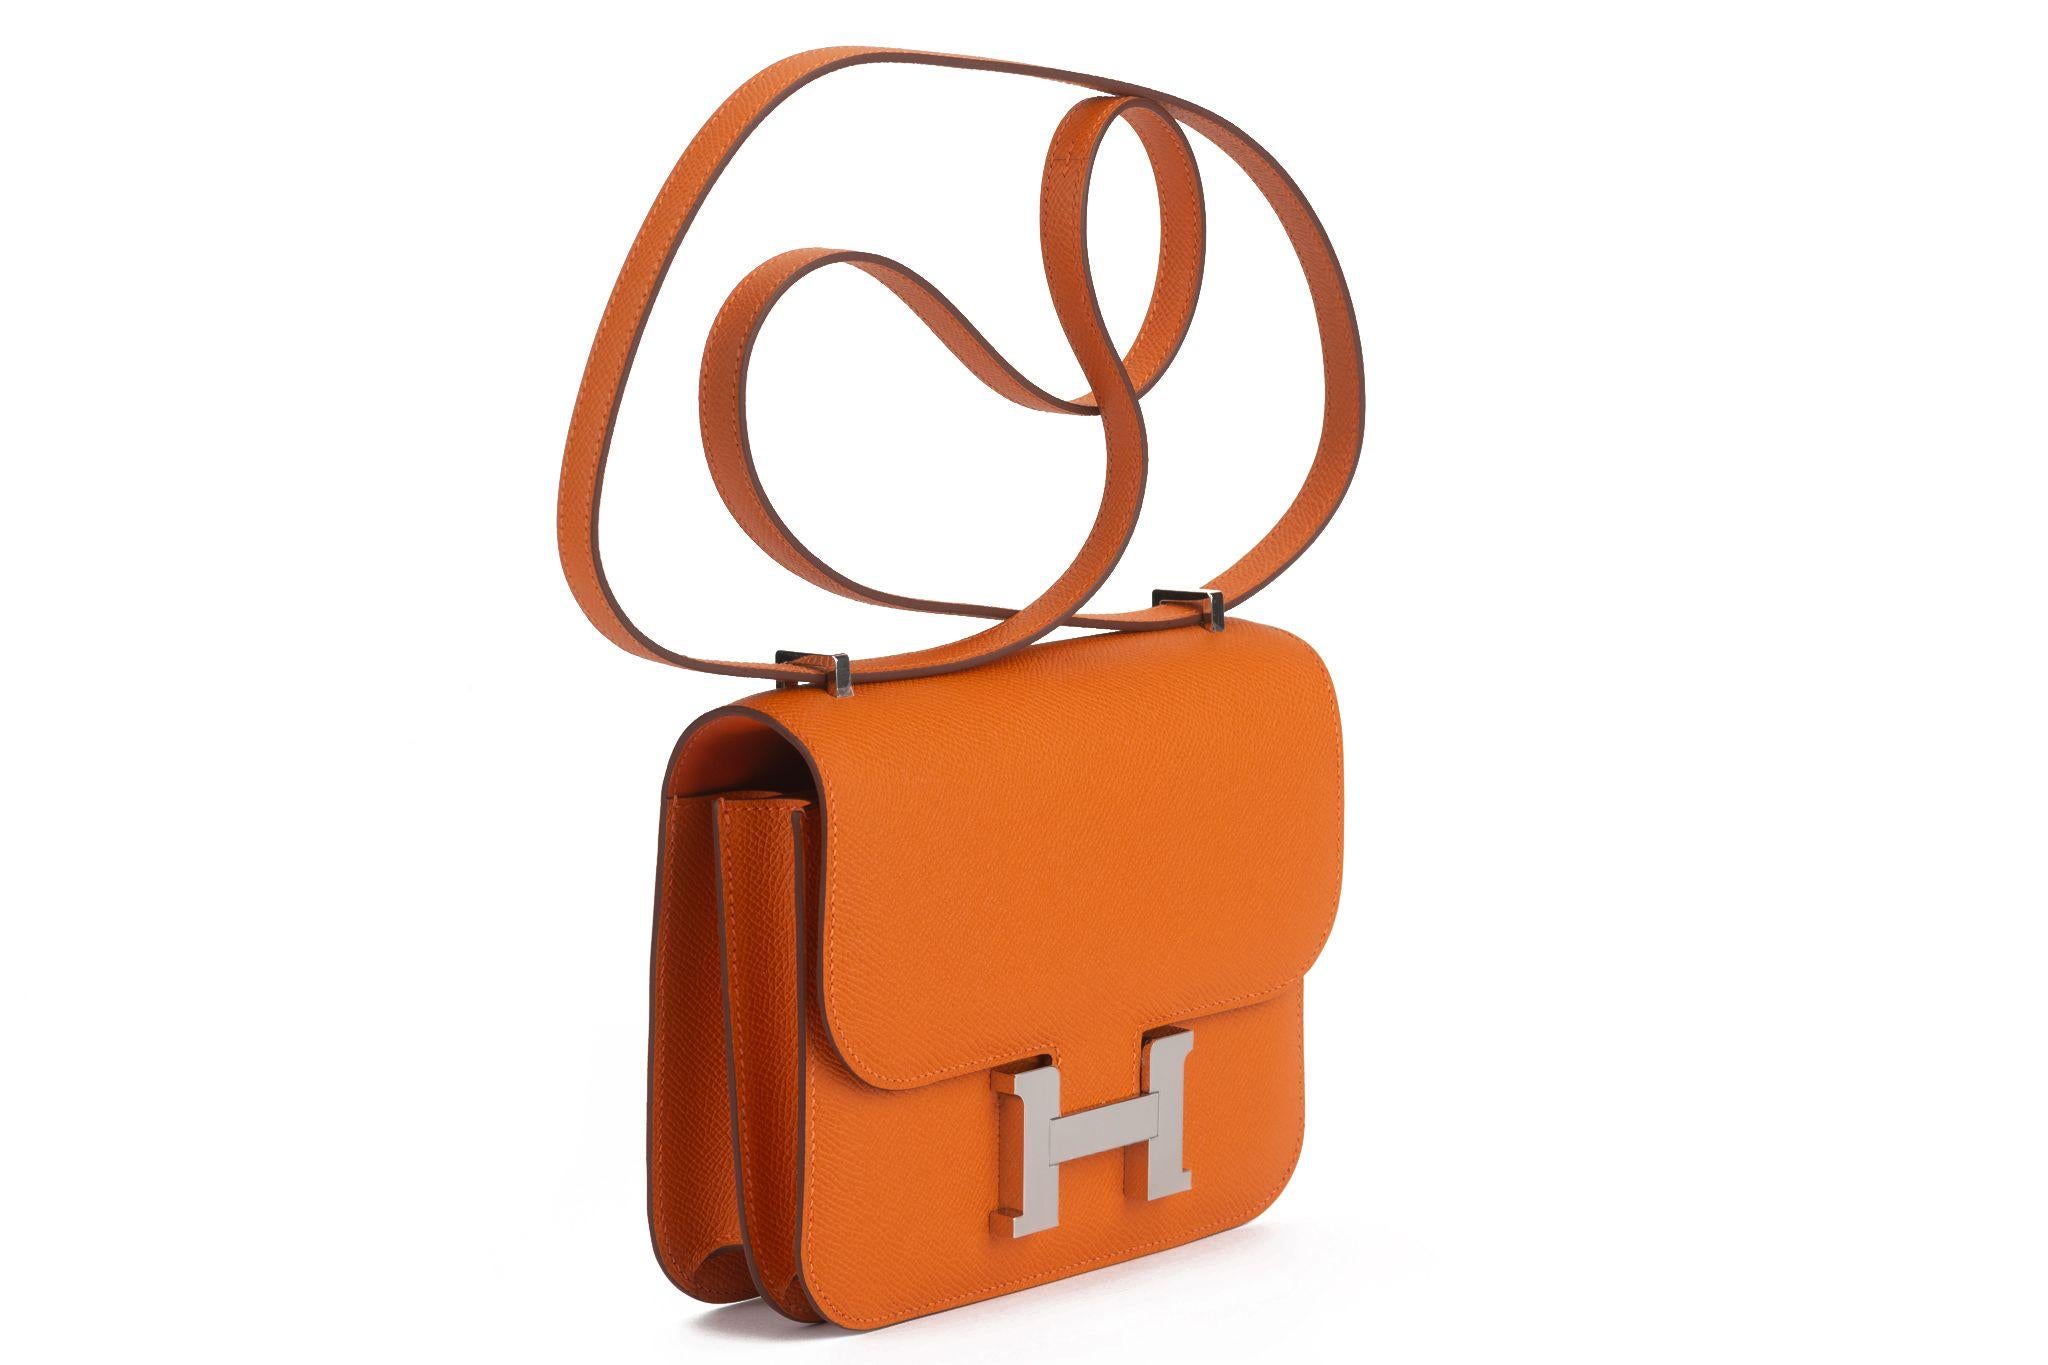 Hermes Constance Leather Handbag is your perfect small chic bag featuring orange epsom leather, shoulder strap, a front flap and palladium H logo hardware. Date stamp B. Comes with mirror, felt, booklet, original dustcover and box. Brand new in